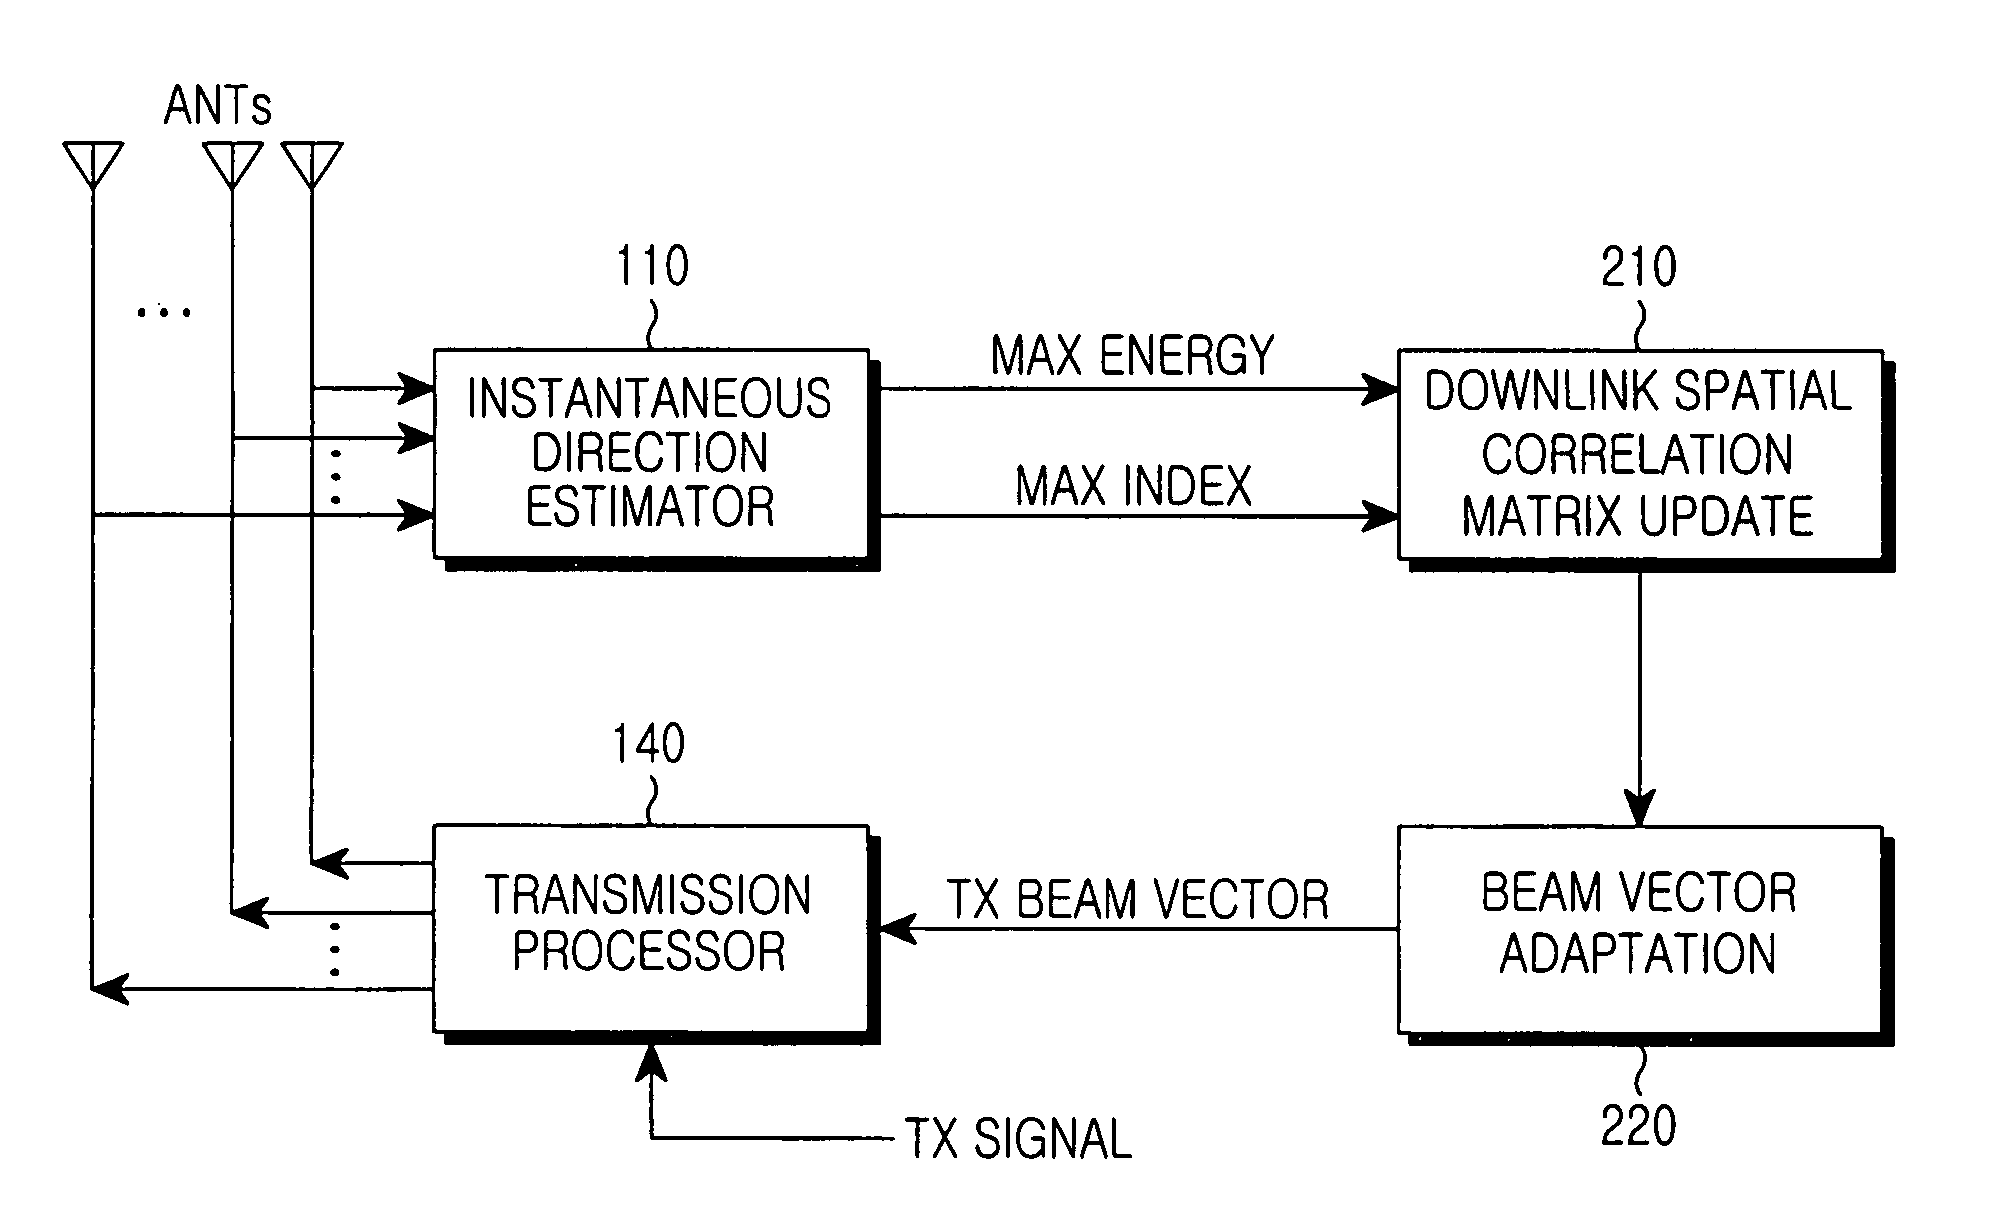 Apparatus and method for forming downlink beam in a smart antenna system